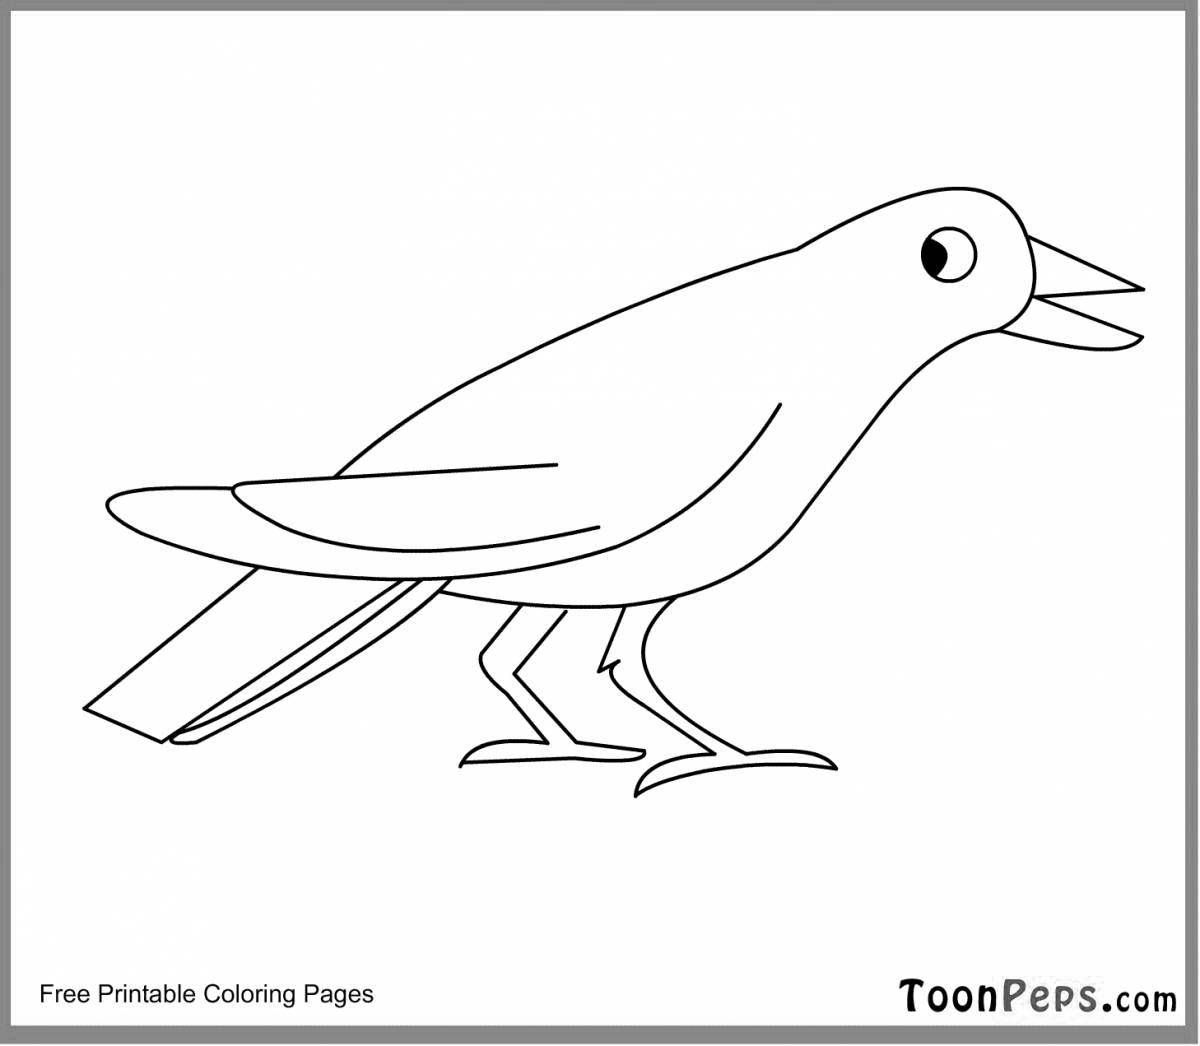 Inspirational crow coloring book for 6-7 year olds